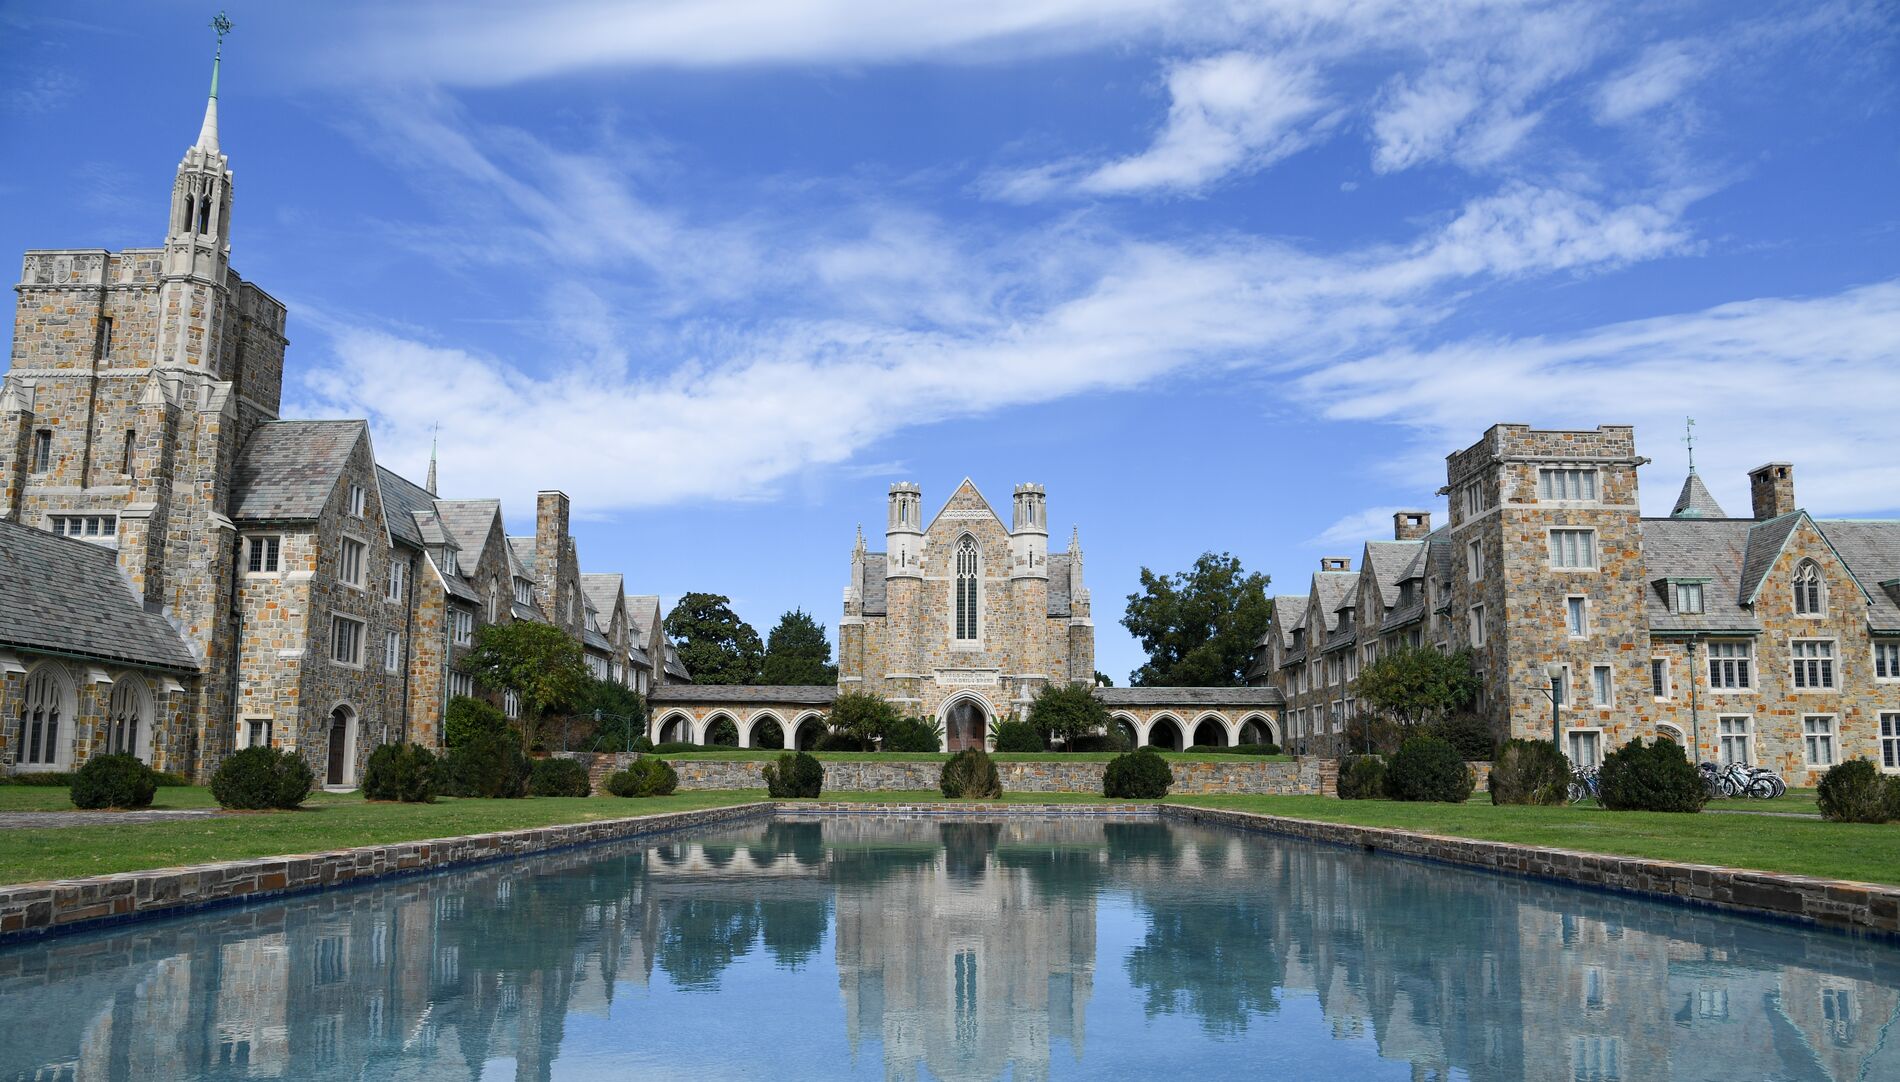             Princeton Review names Berry College in new best colleges guide     